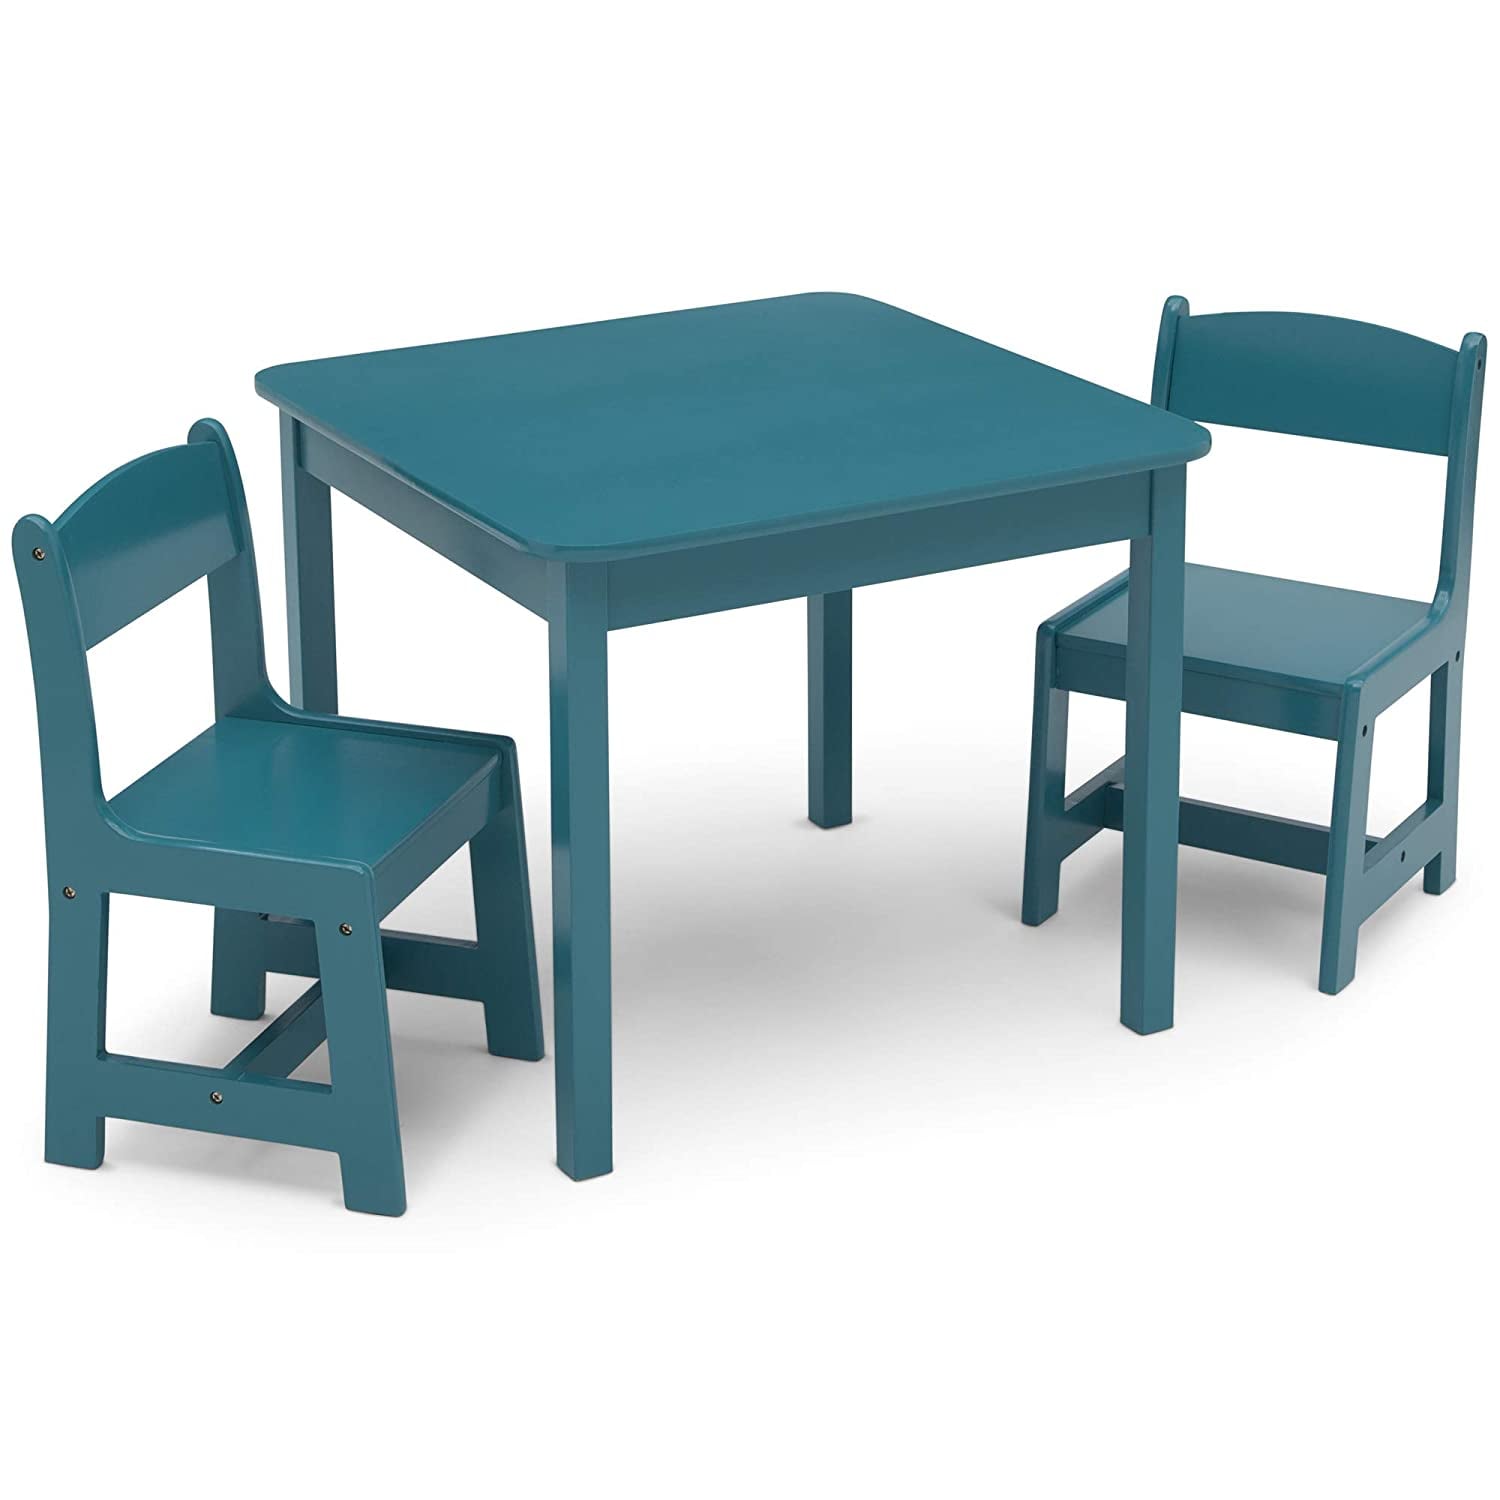 childrens wooden desk and chair set